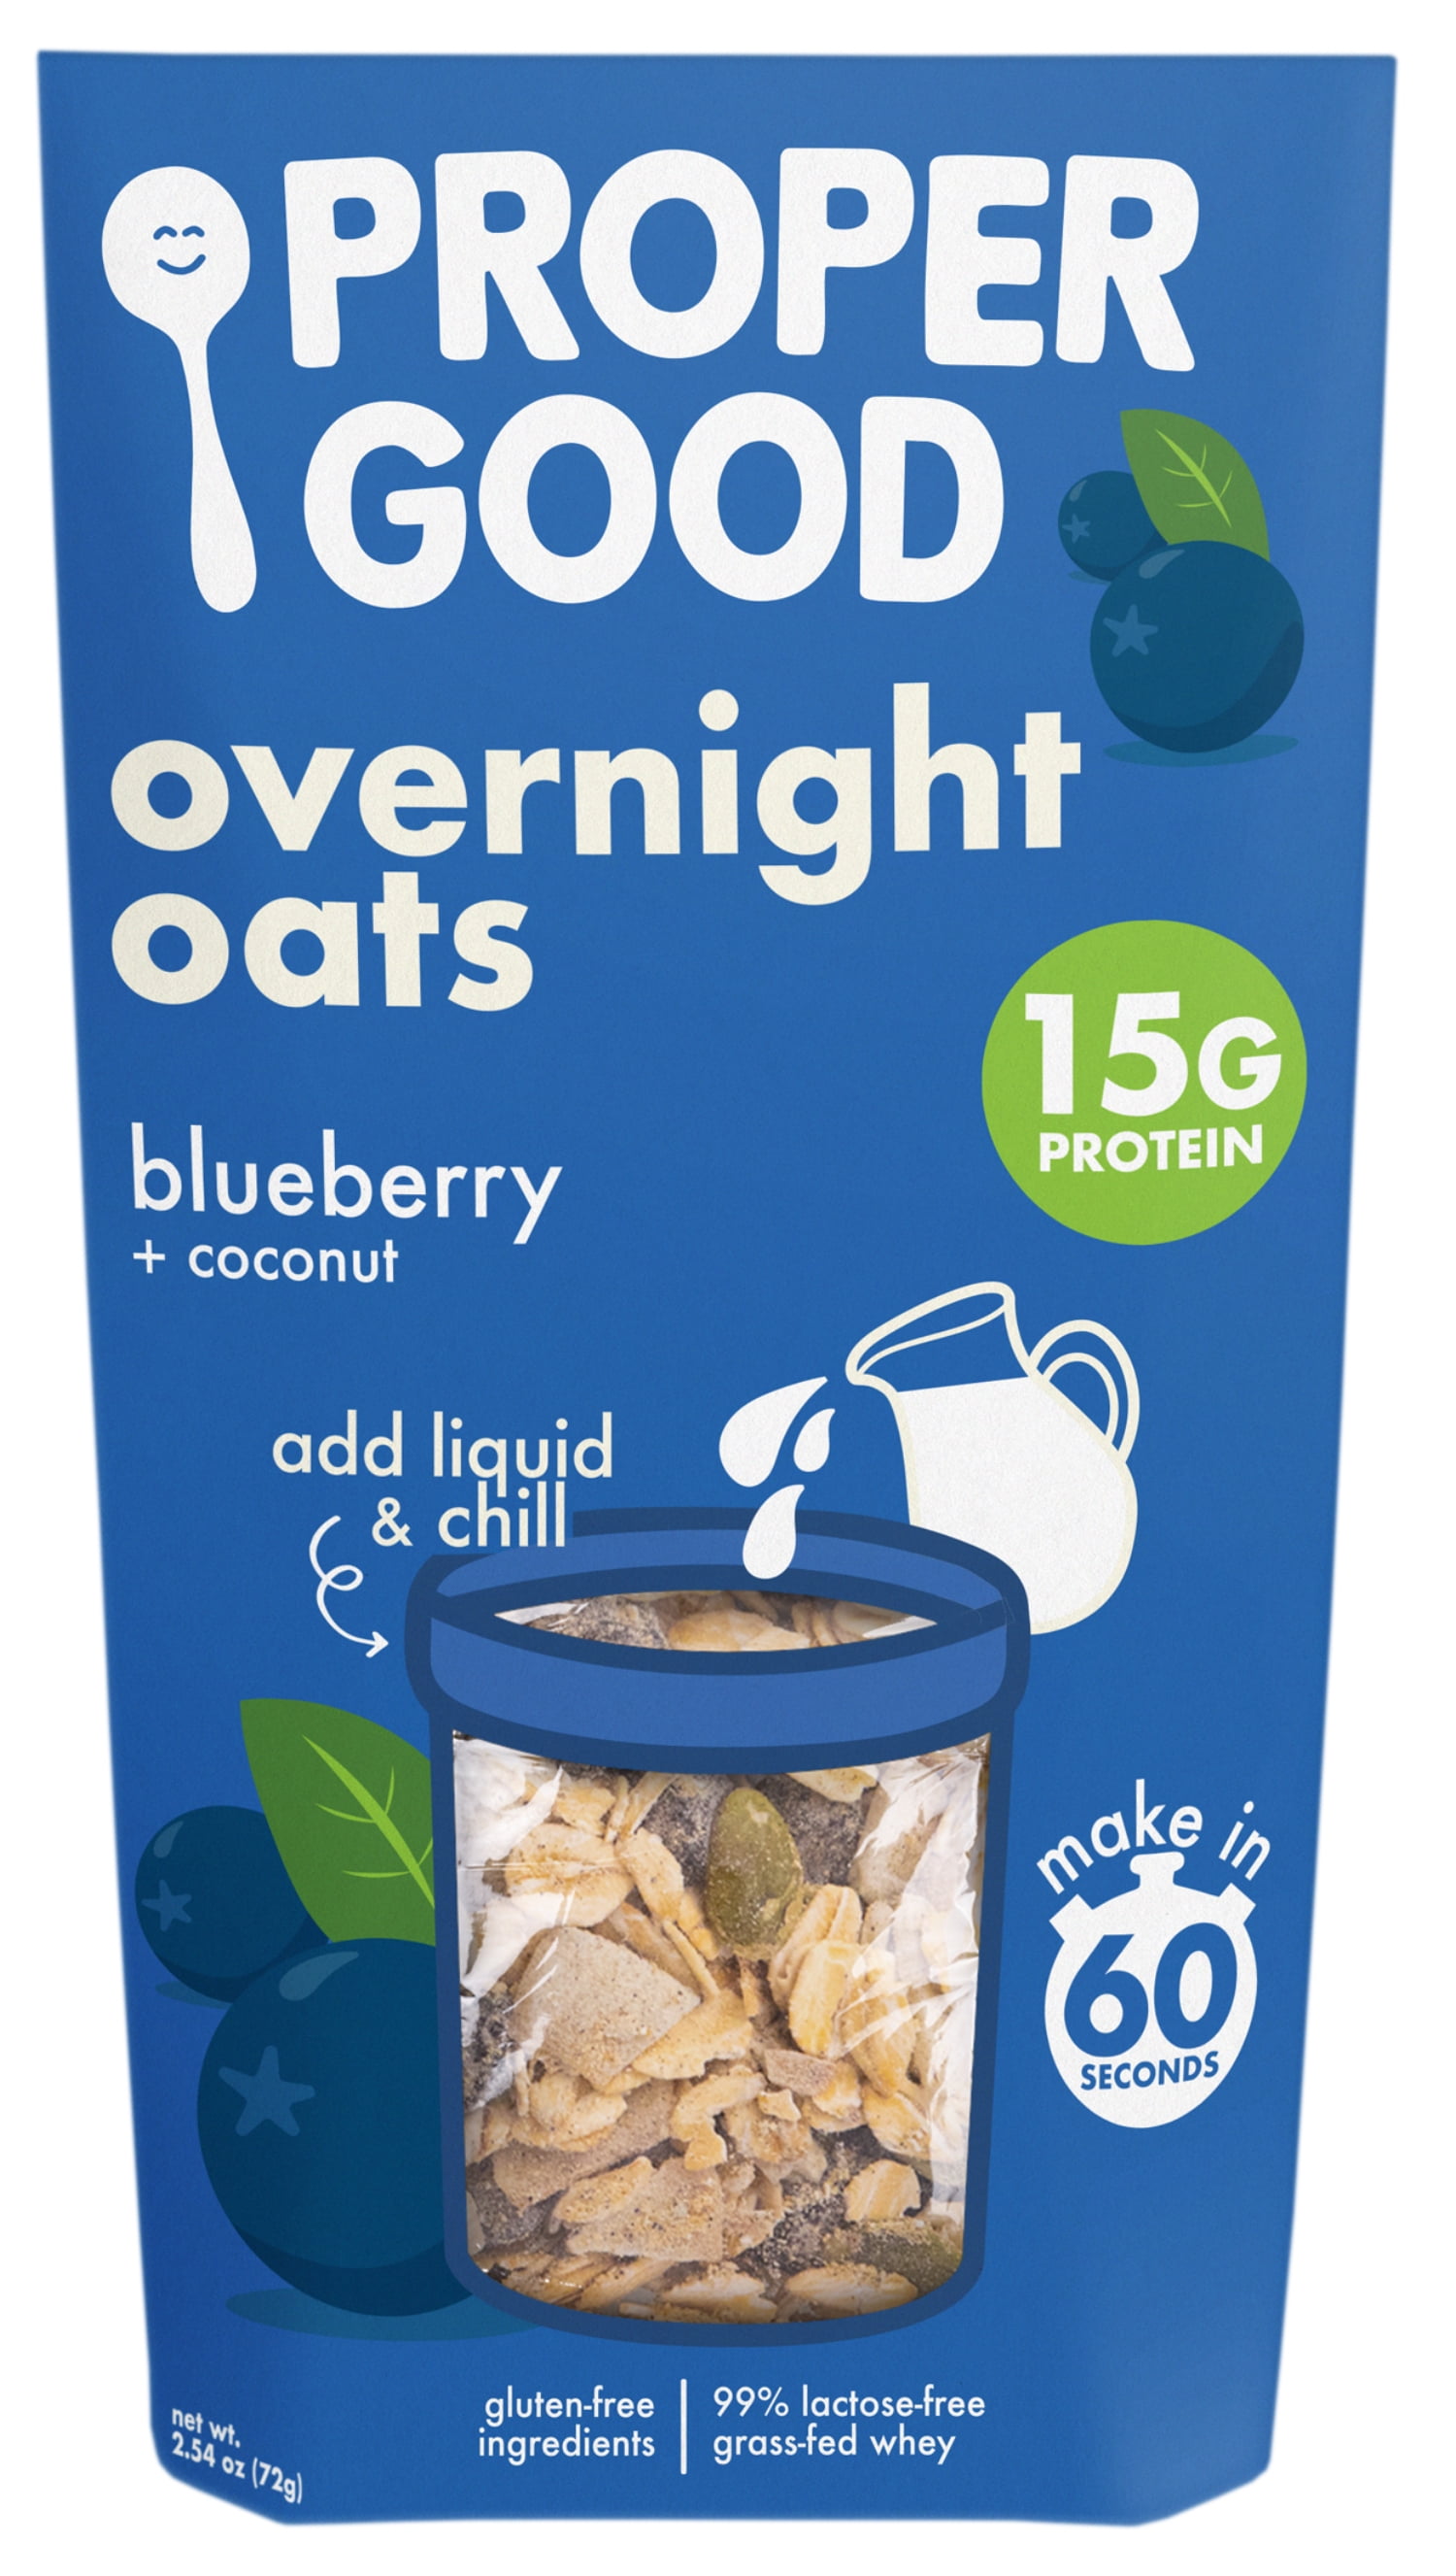 How to Make Overnight Oats - Fed & Fit